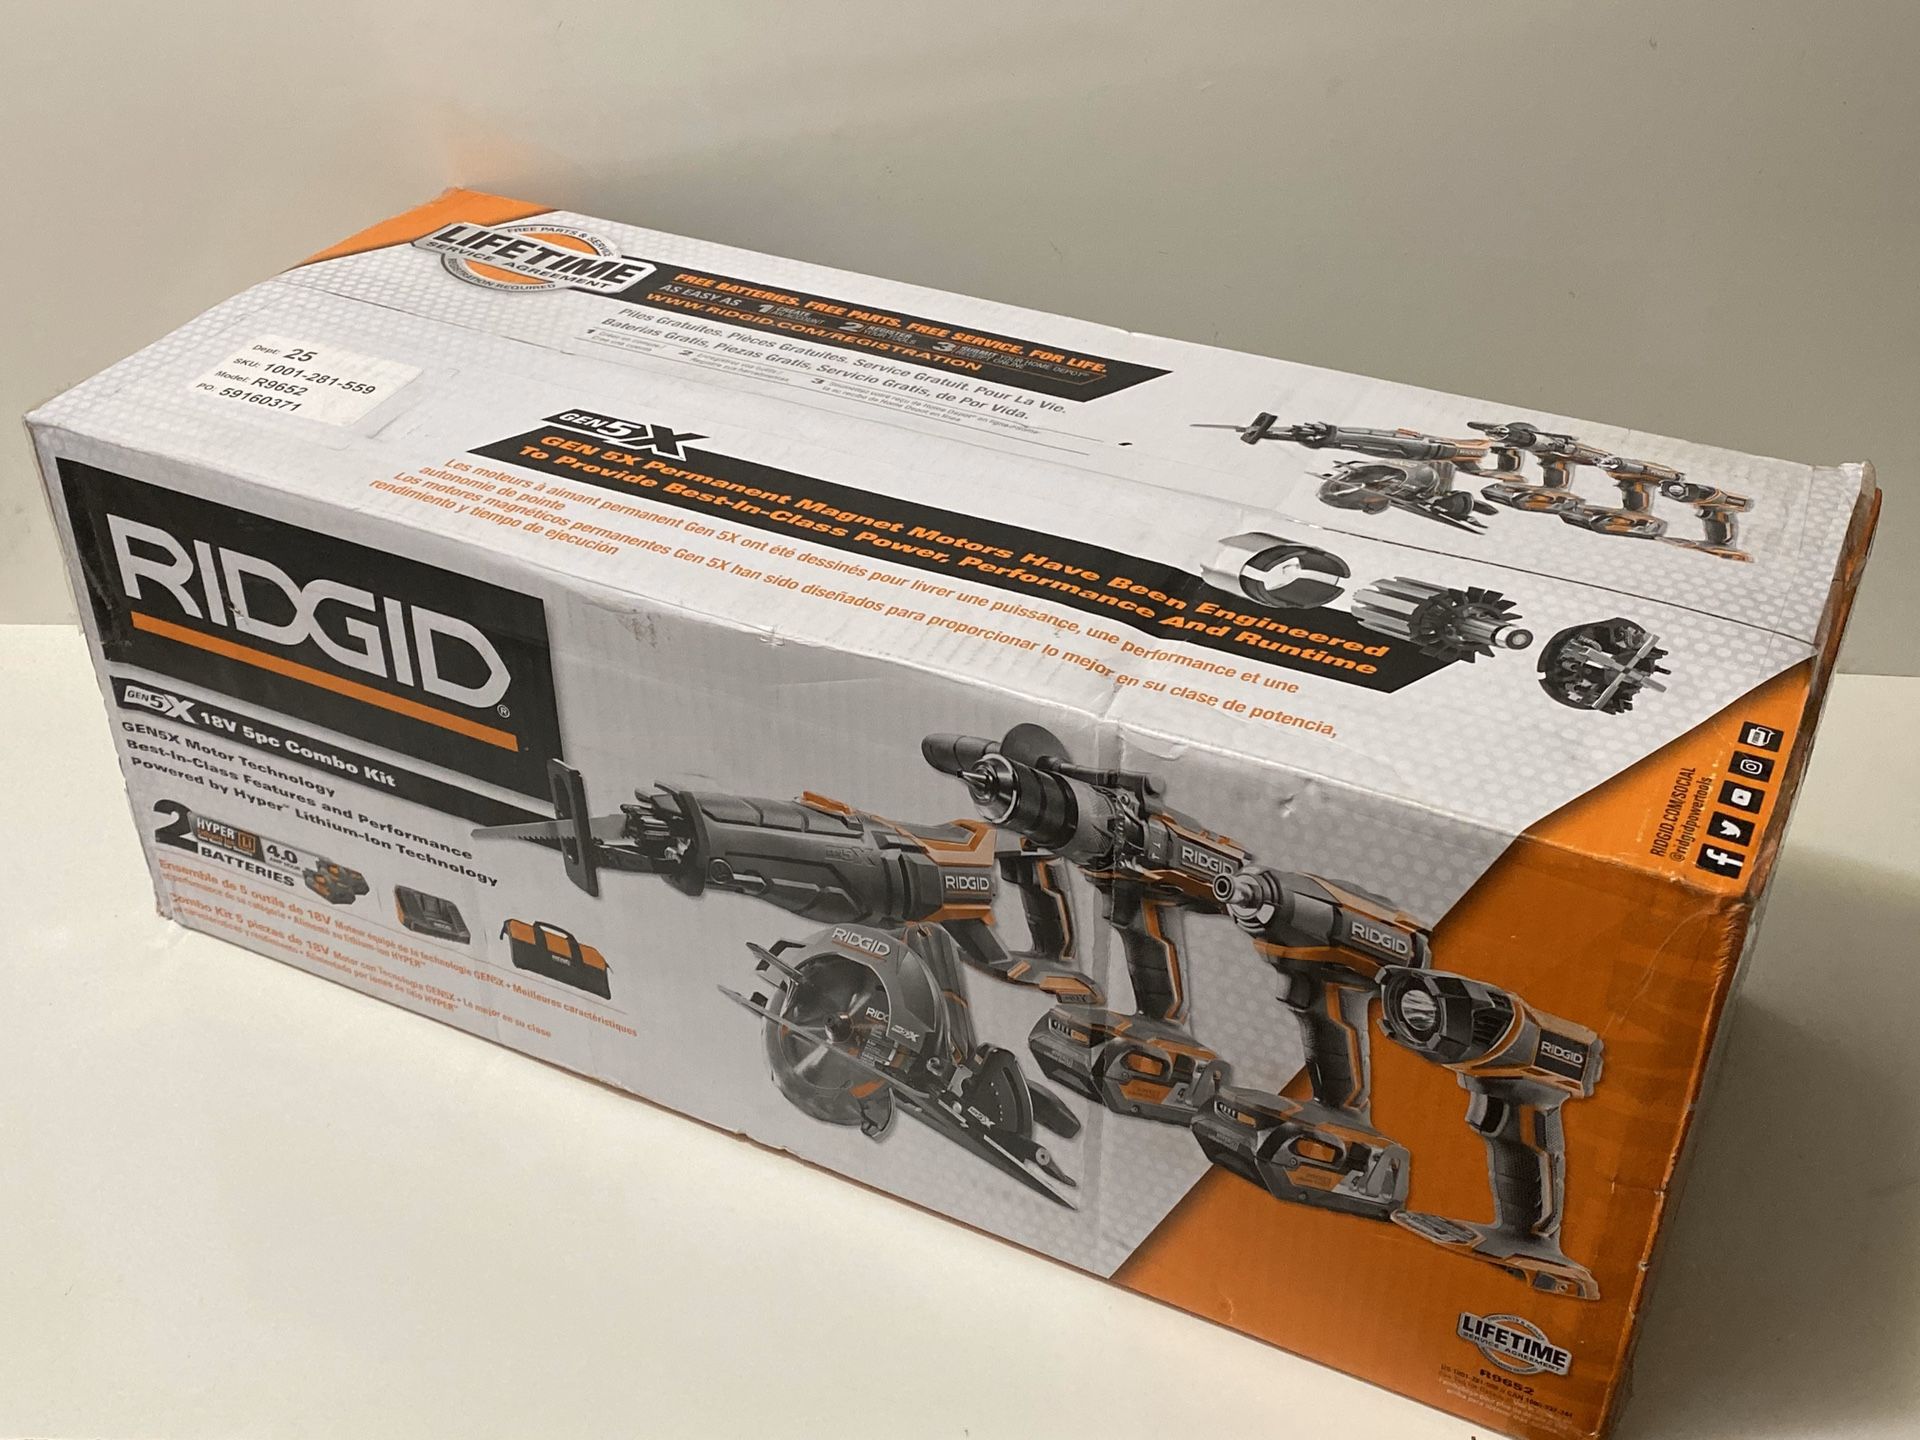 RIDGID 18-Volt Lithium-Ion Cordless 5-Tool Combo Kit with (2) 4.0 Ah Batteries, 18-Volt Charger